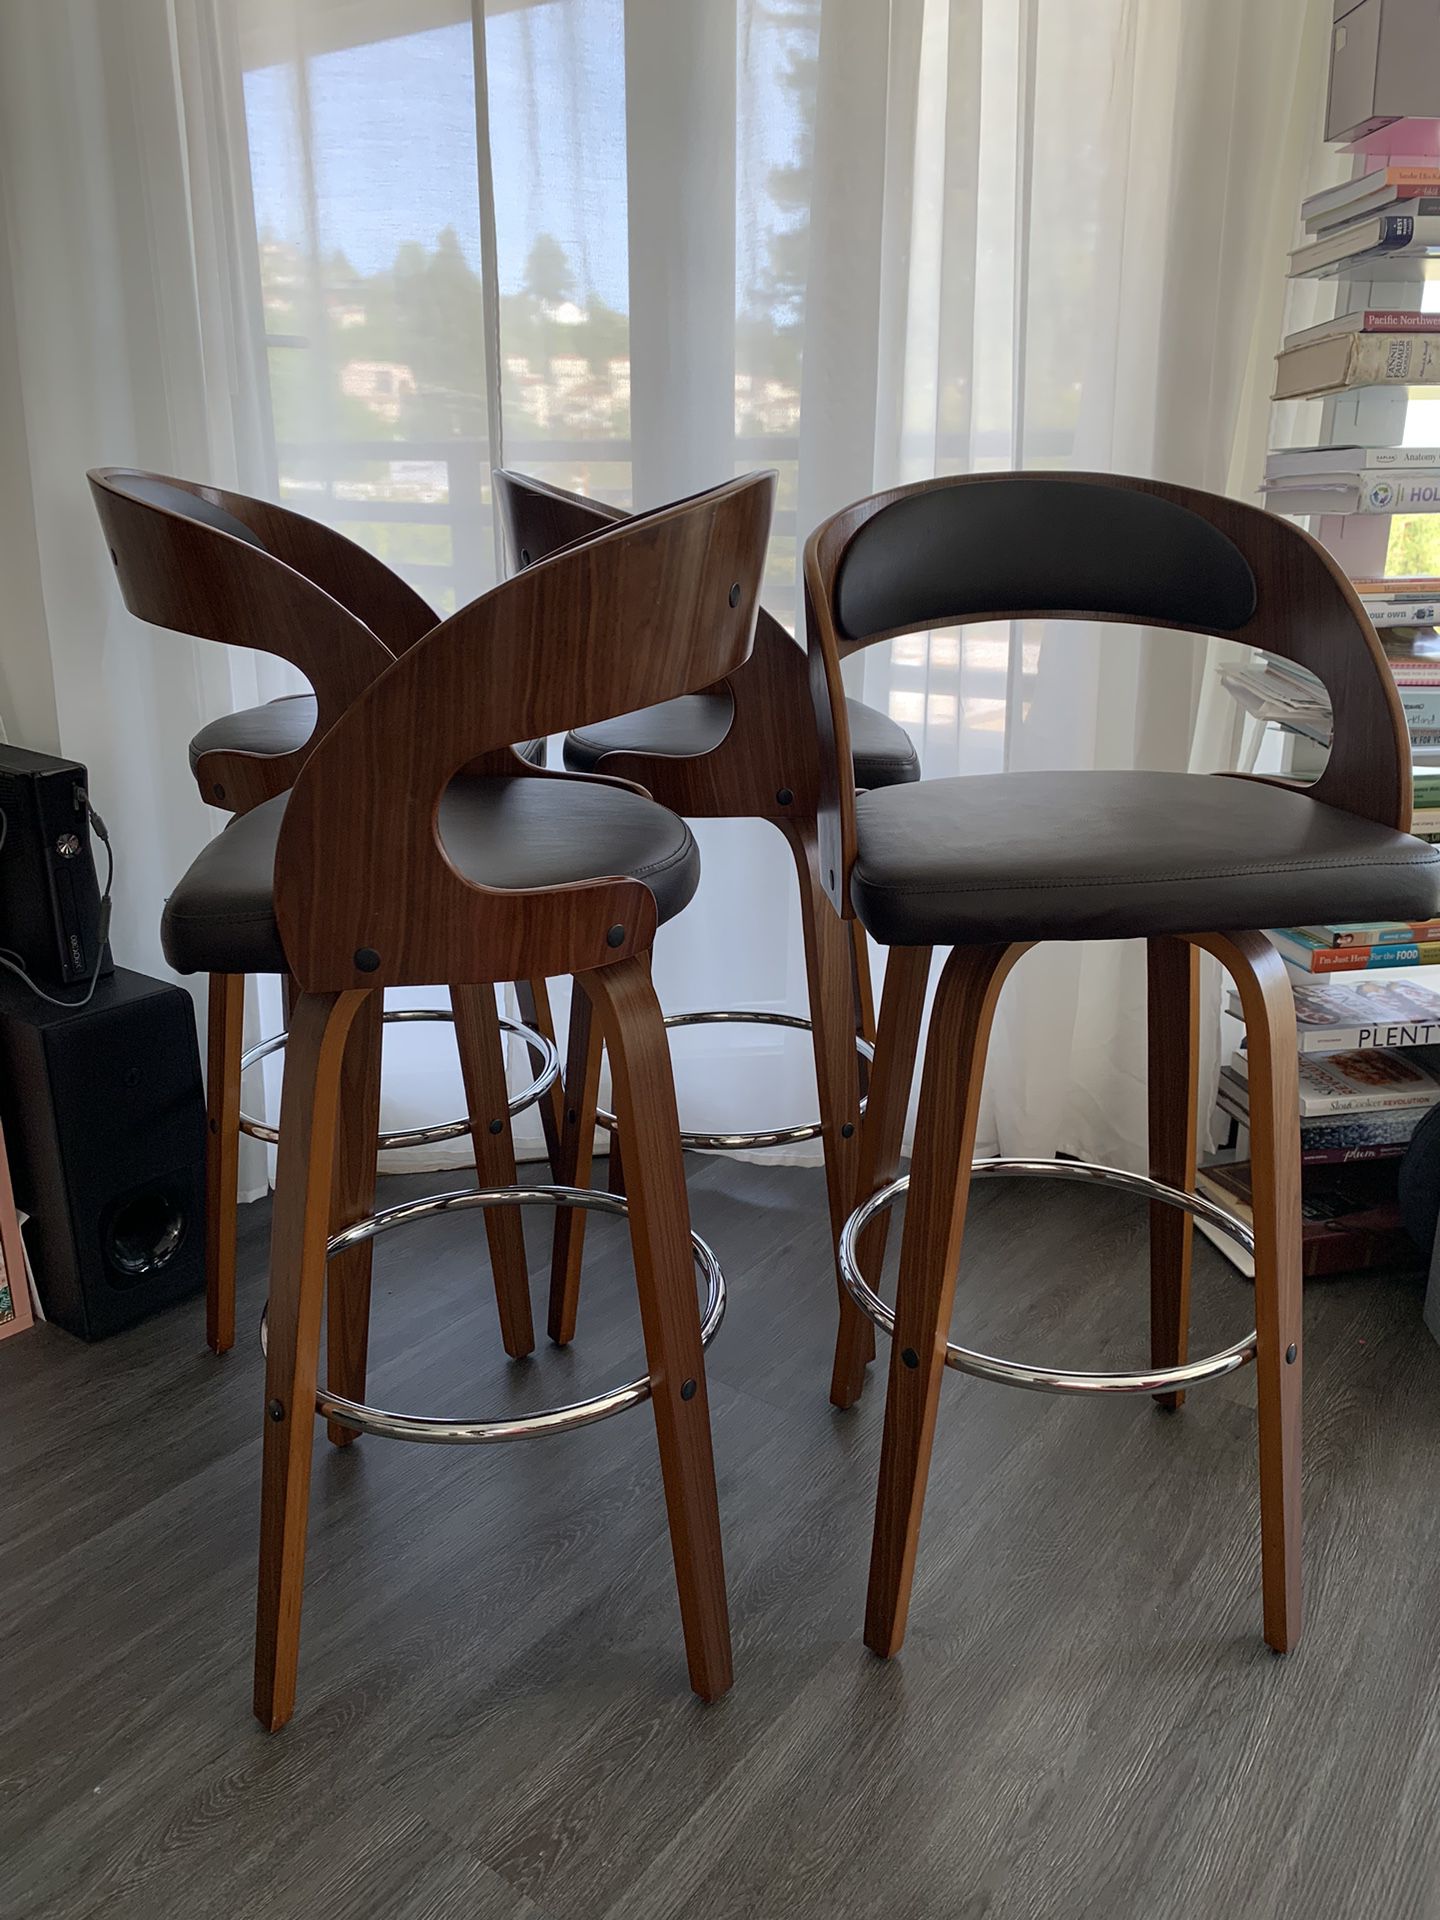 4 Swivel Bar Stools - Brown Faux Leather and Walnut 